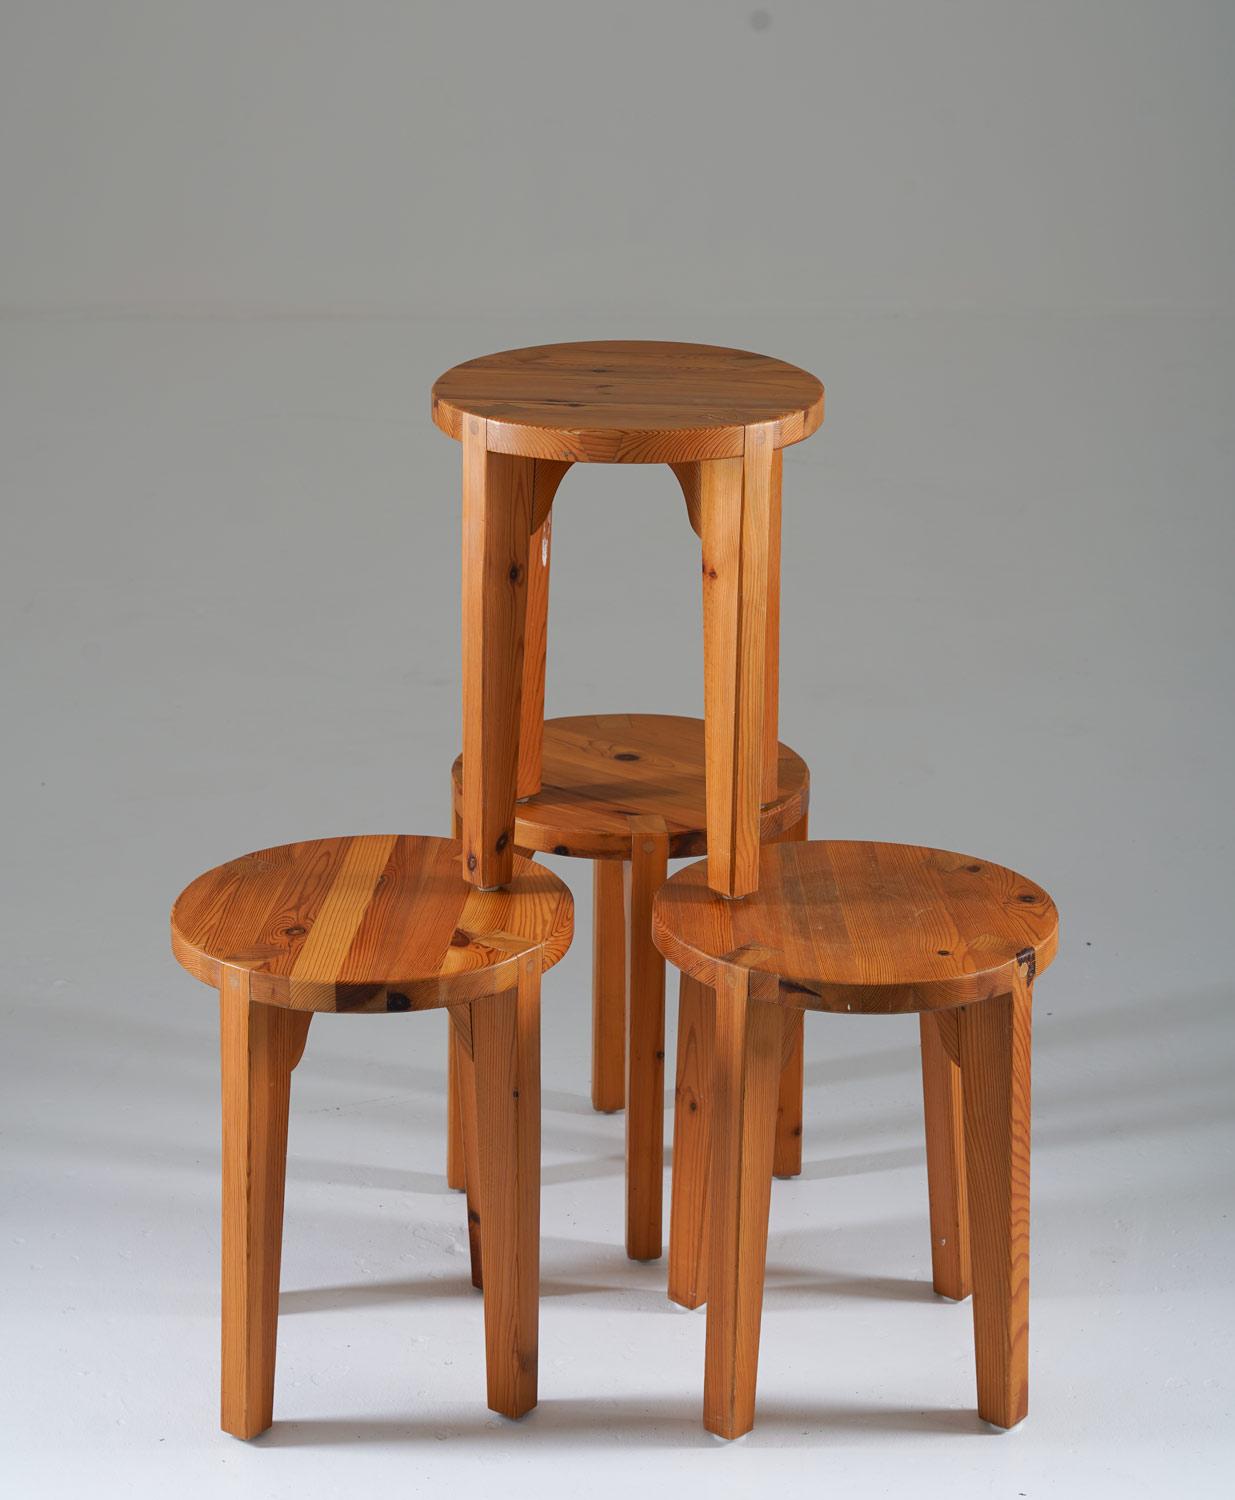 Rare stools manufactured in Sweden, ca 1970. 
Studio craft stools with a round seat, resting on four legs that are beautifully connected with visible joinery.

Condition: Good original condition with light patina.